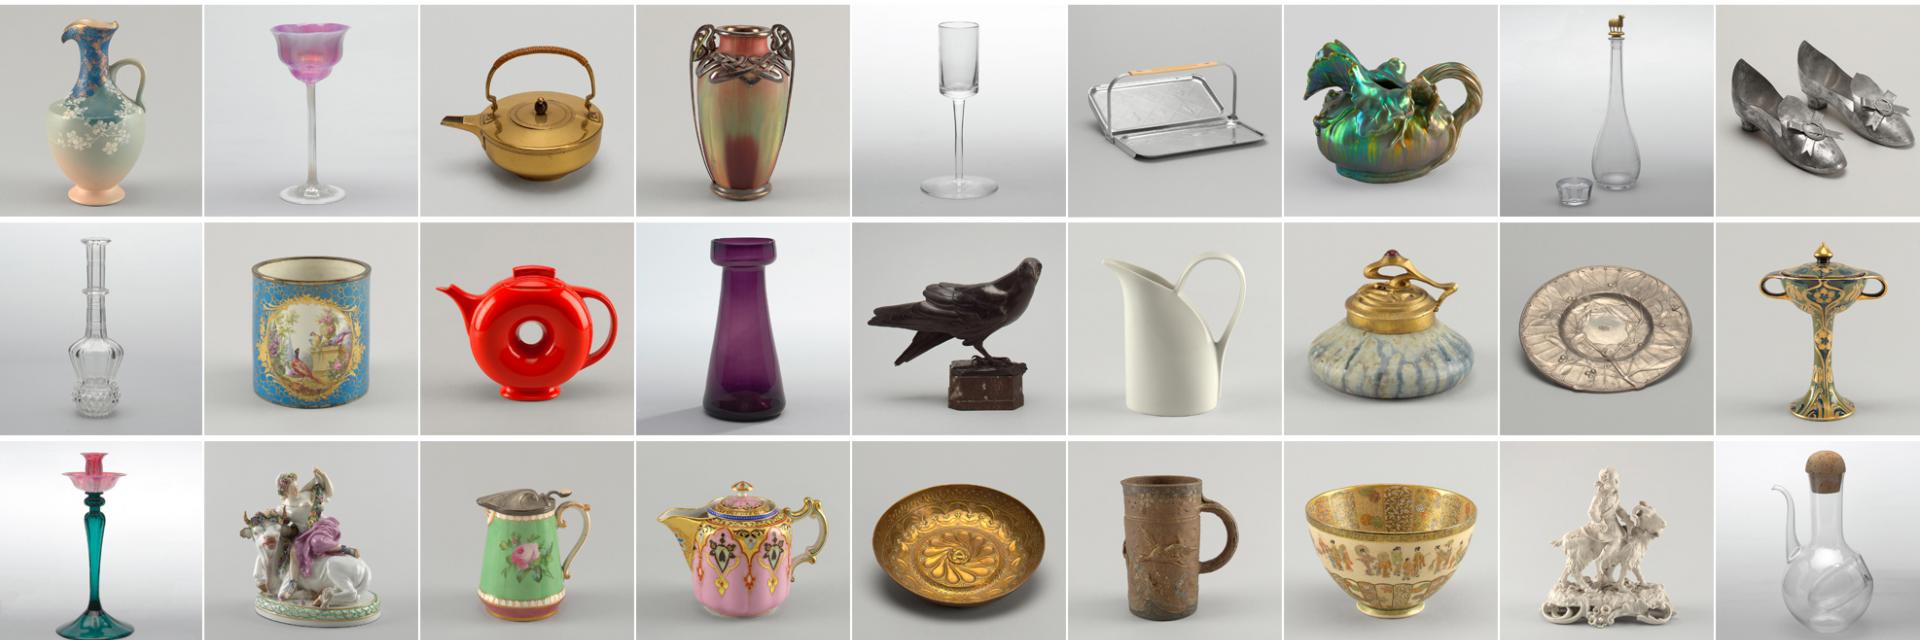 Cooper Hewitt Collection Images